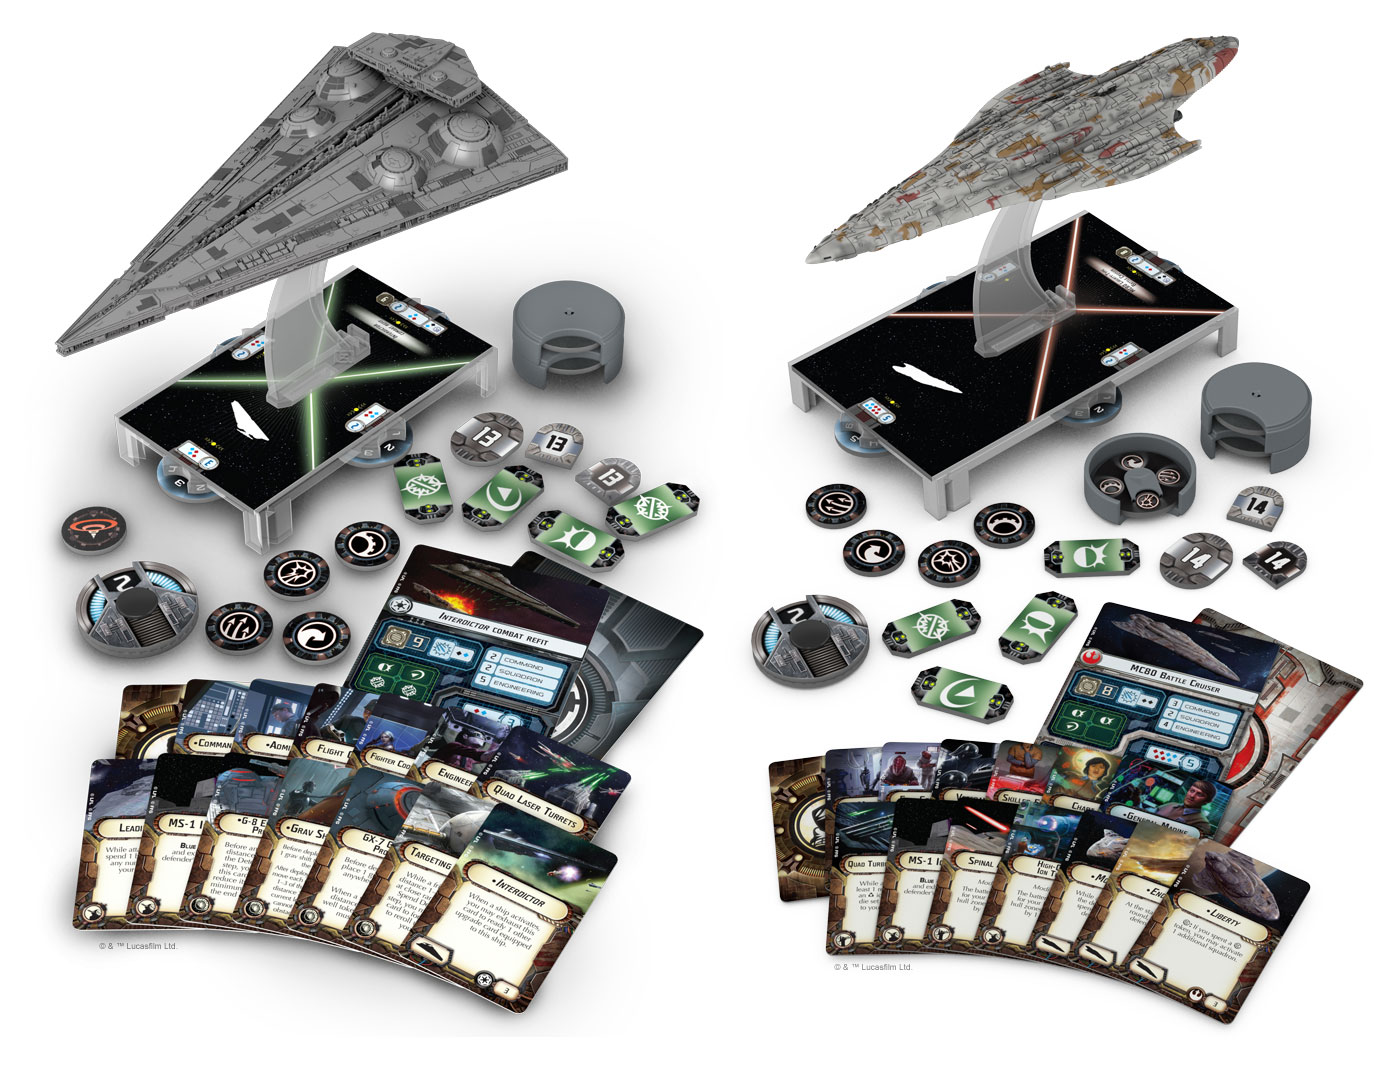 The Star Wars Board Games Just Keep Getting Better